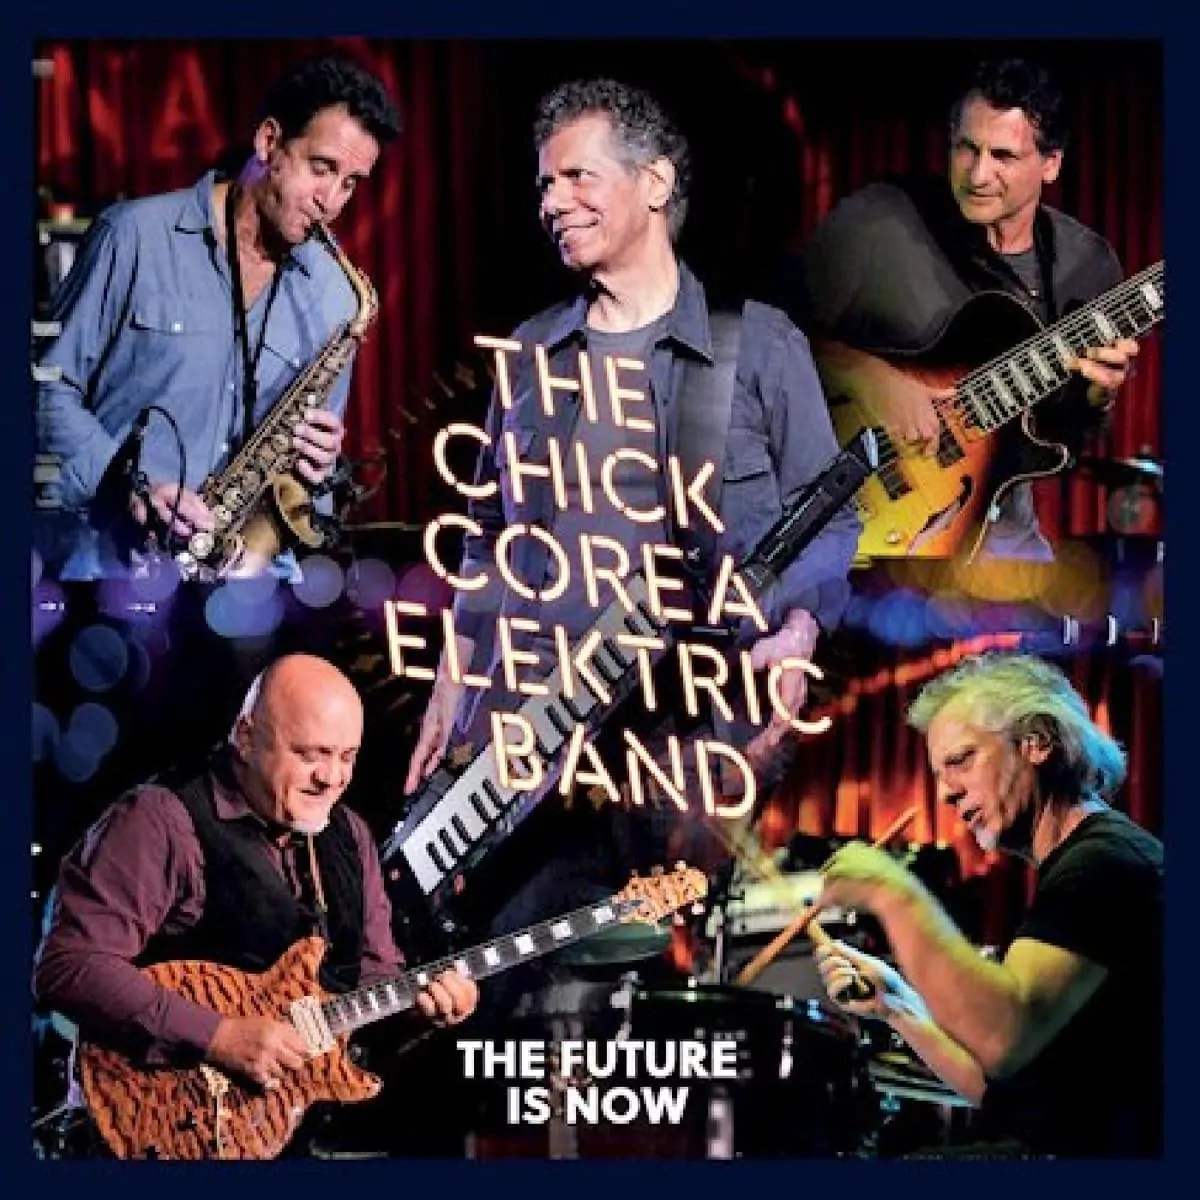 The Future Is Now - The Chick Corea Elektric Band